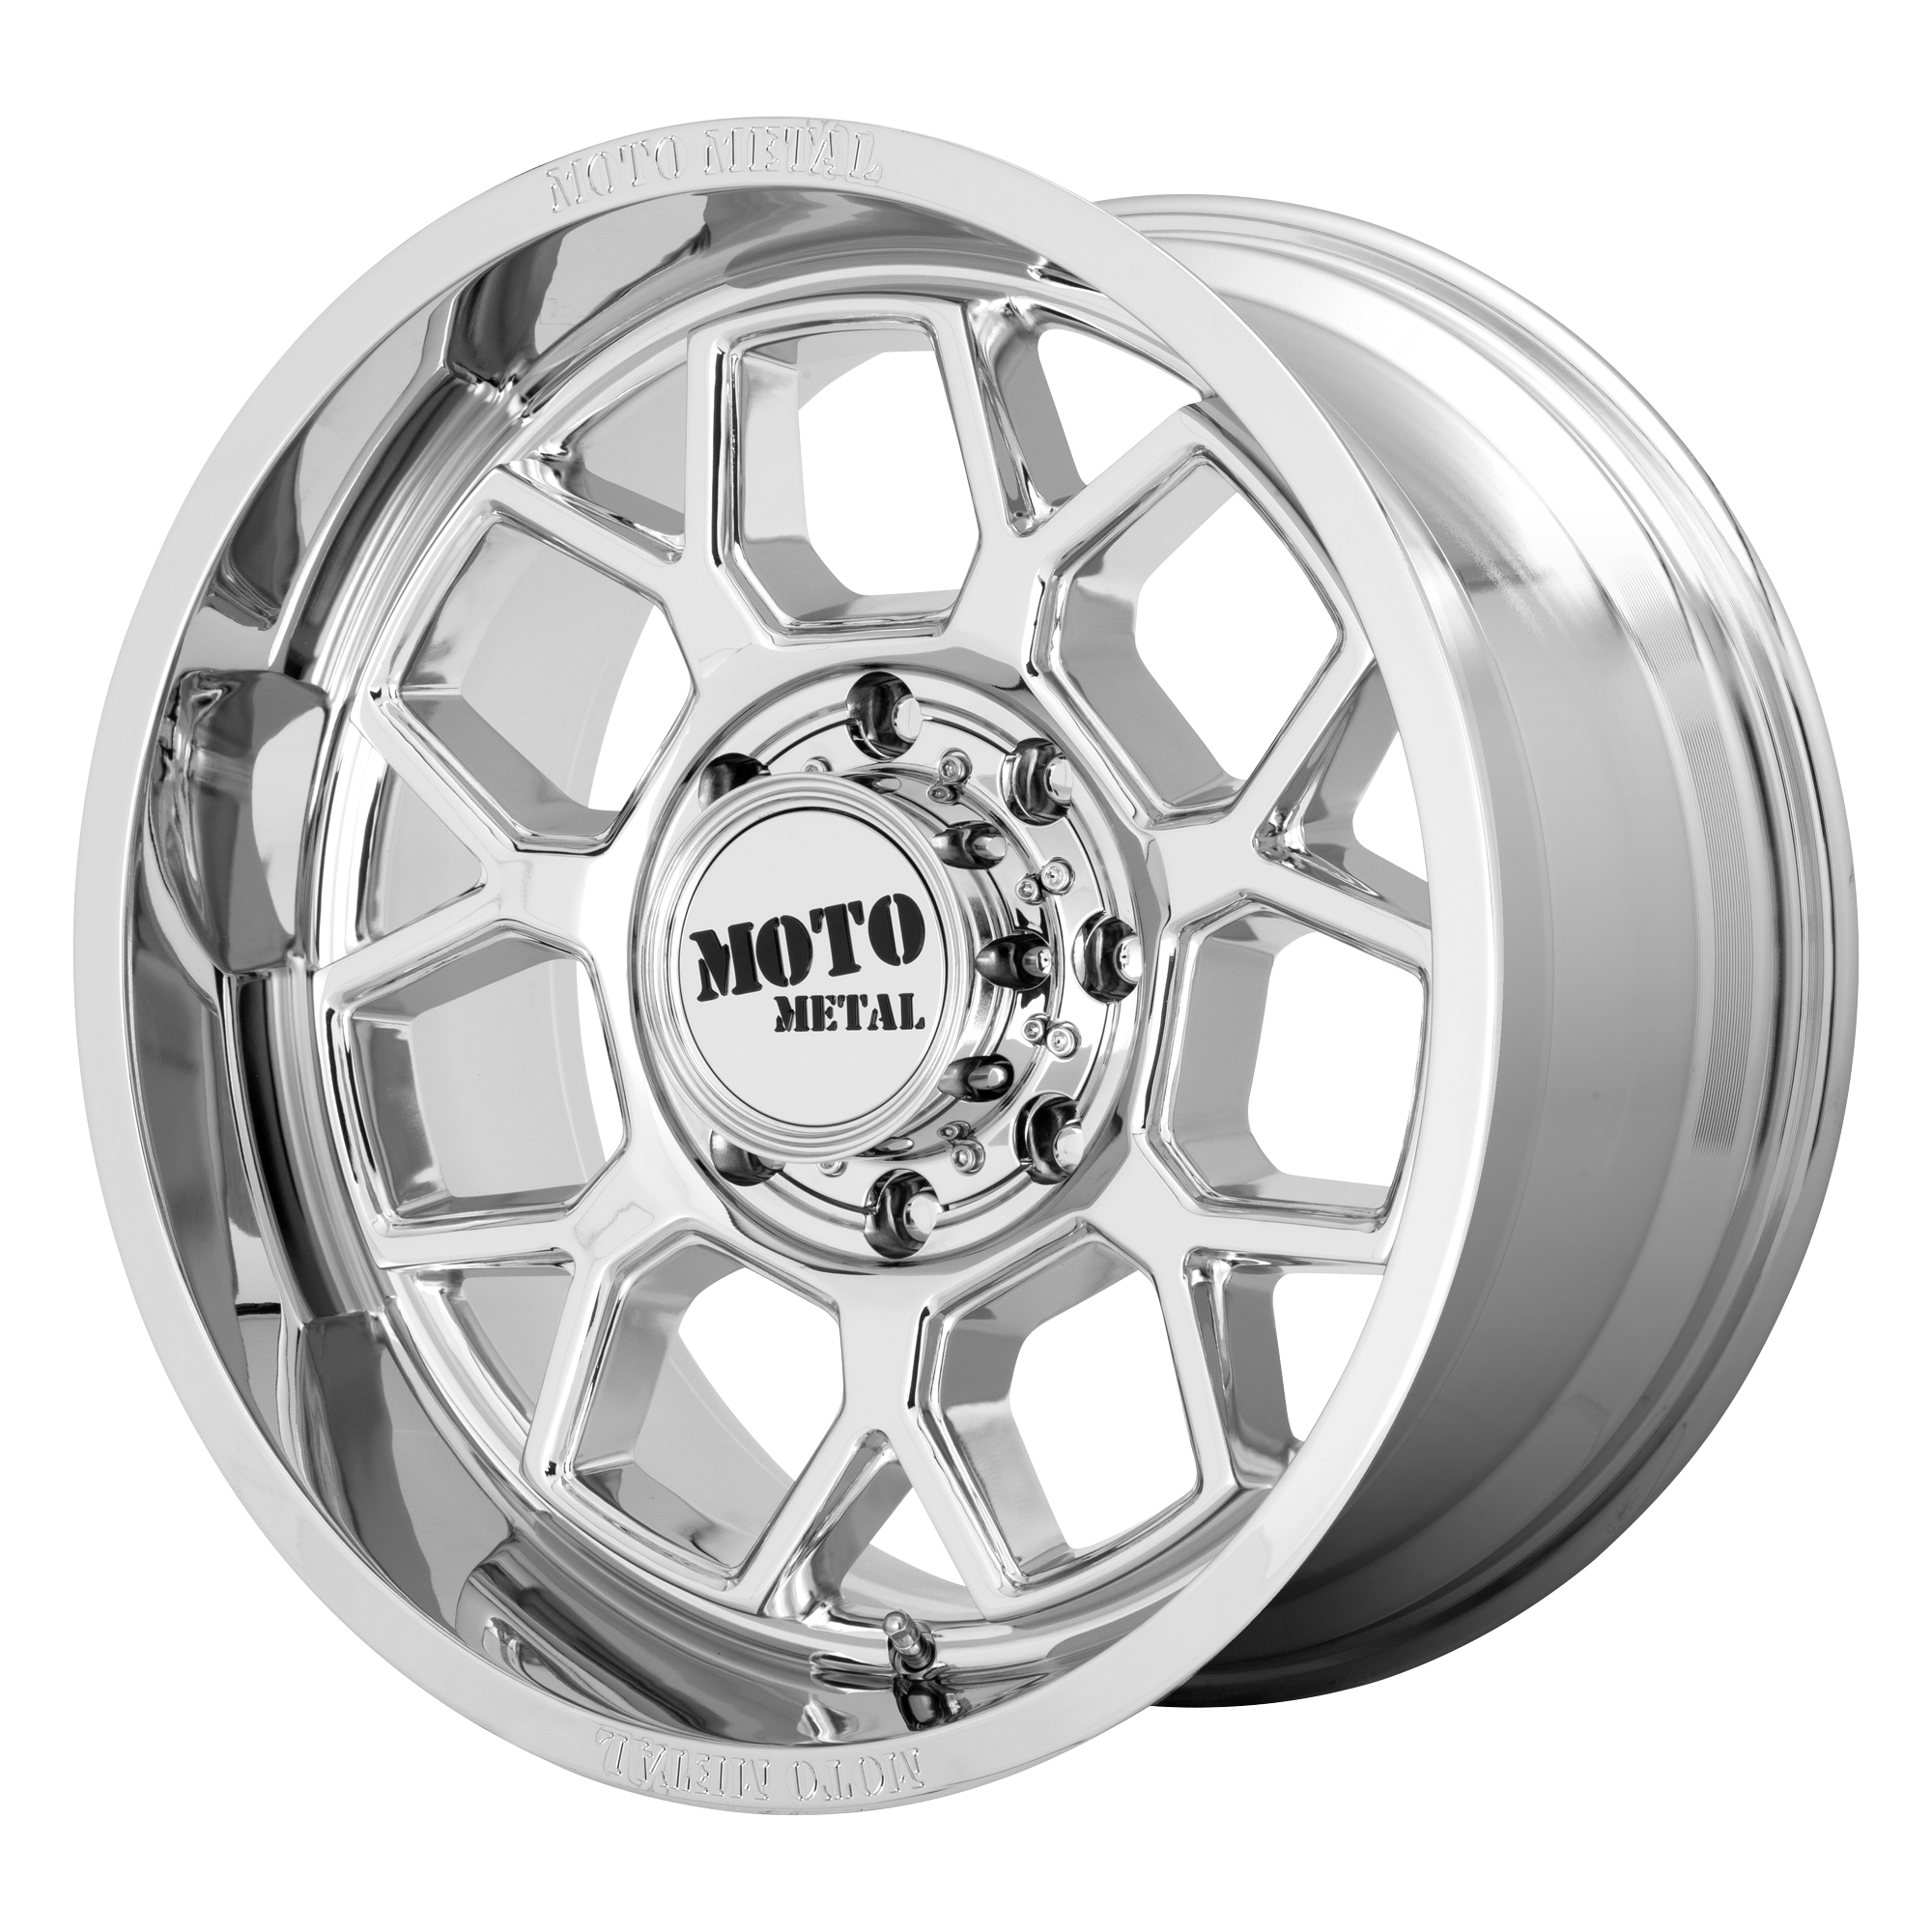 BANSHEE 20x10 6x139.70 CHROME (-18 mm) - Tires and Engine Performance